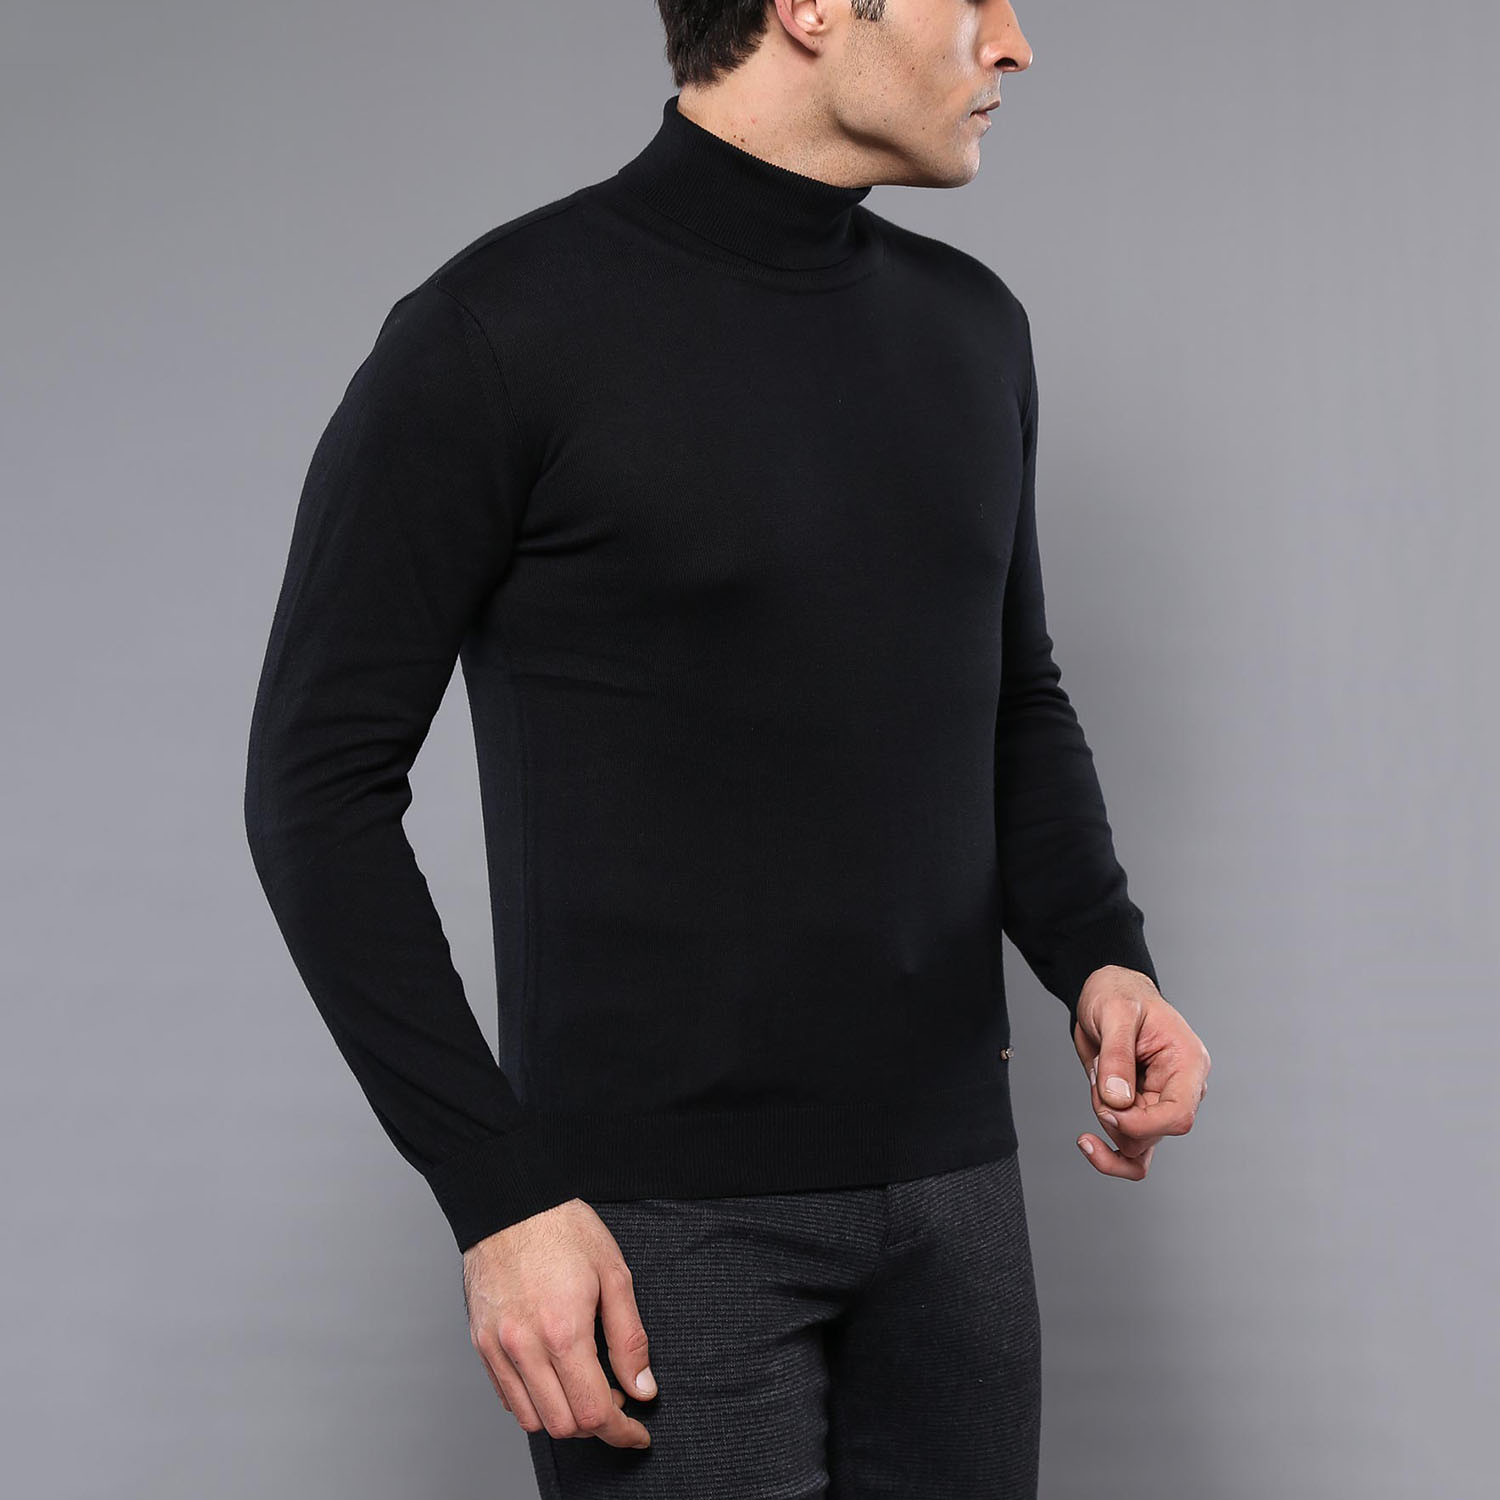 Christian Slim Fit Turtleneck Knit Sweater // Black (S) - Wessi - Touch ...